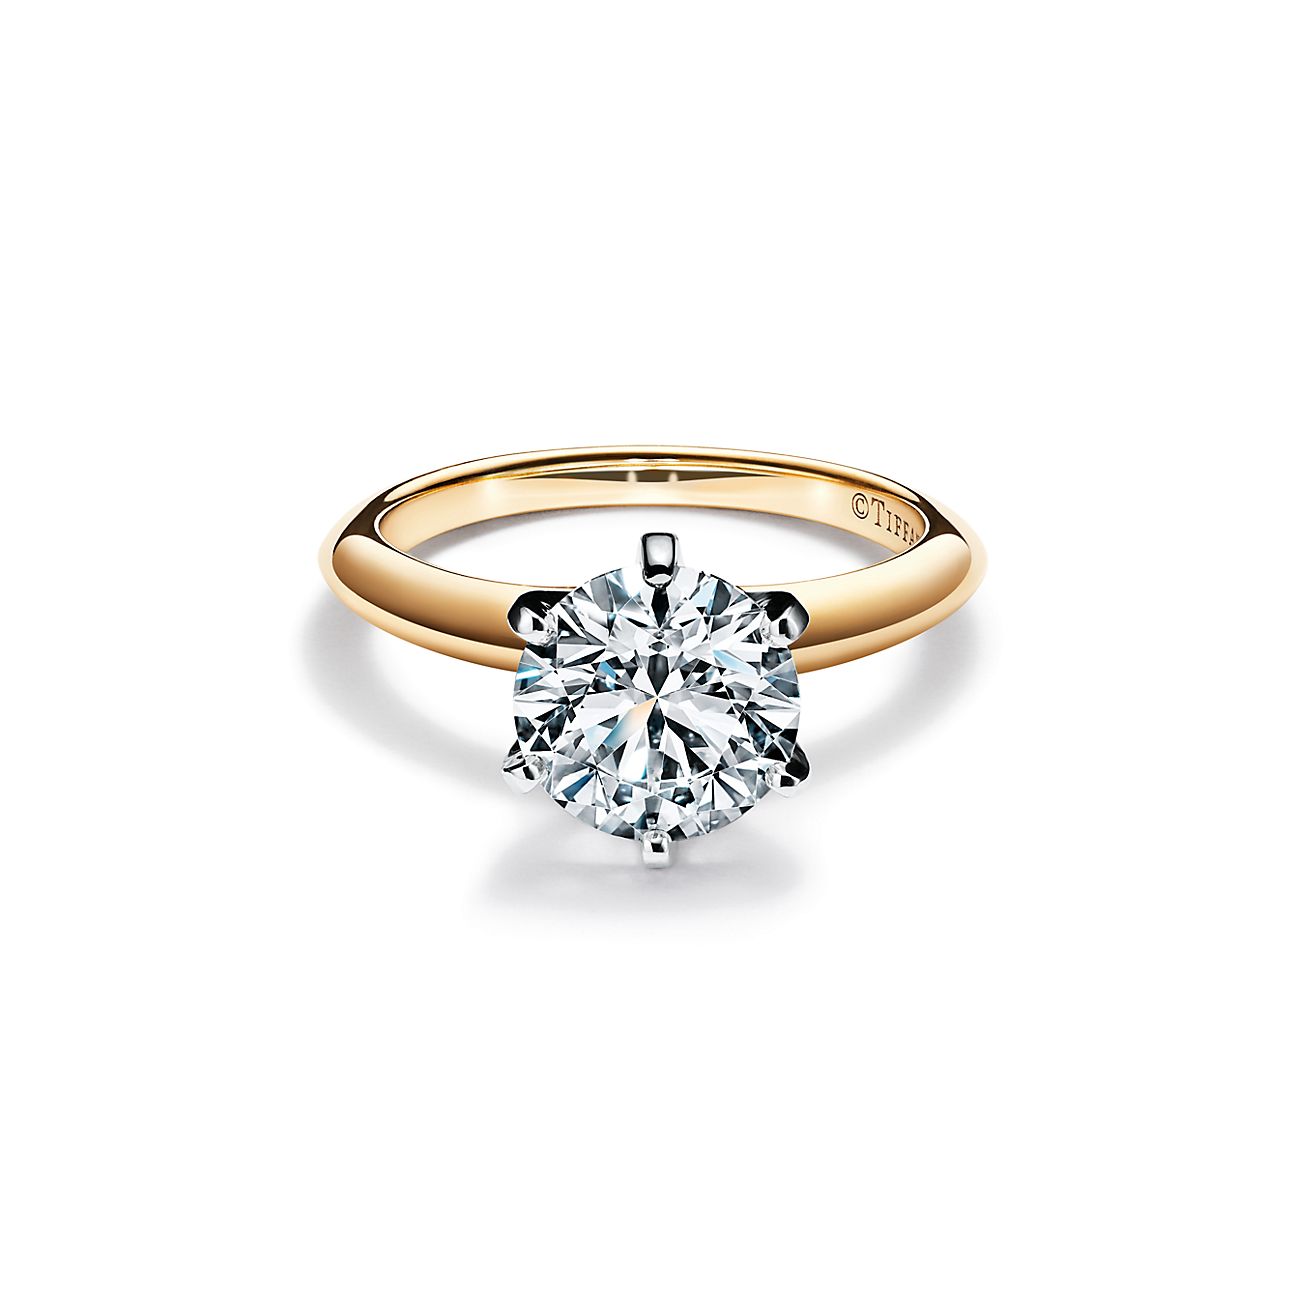 Details about  / Yellow Gold Over Ladies 2.Ct Round Cut VVS1 Diamond Engagement Ring Wedding Band